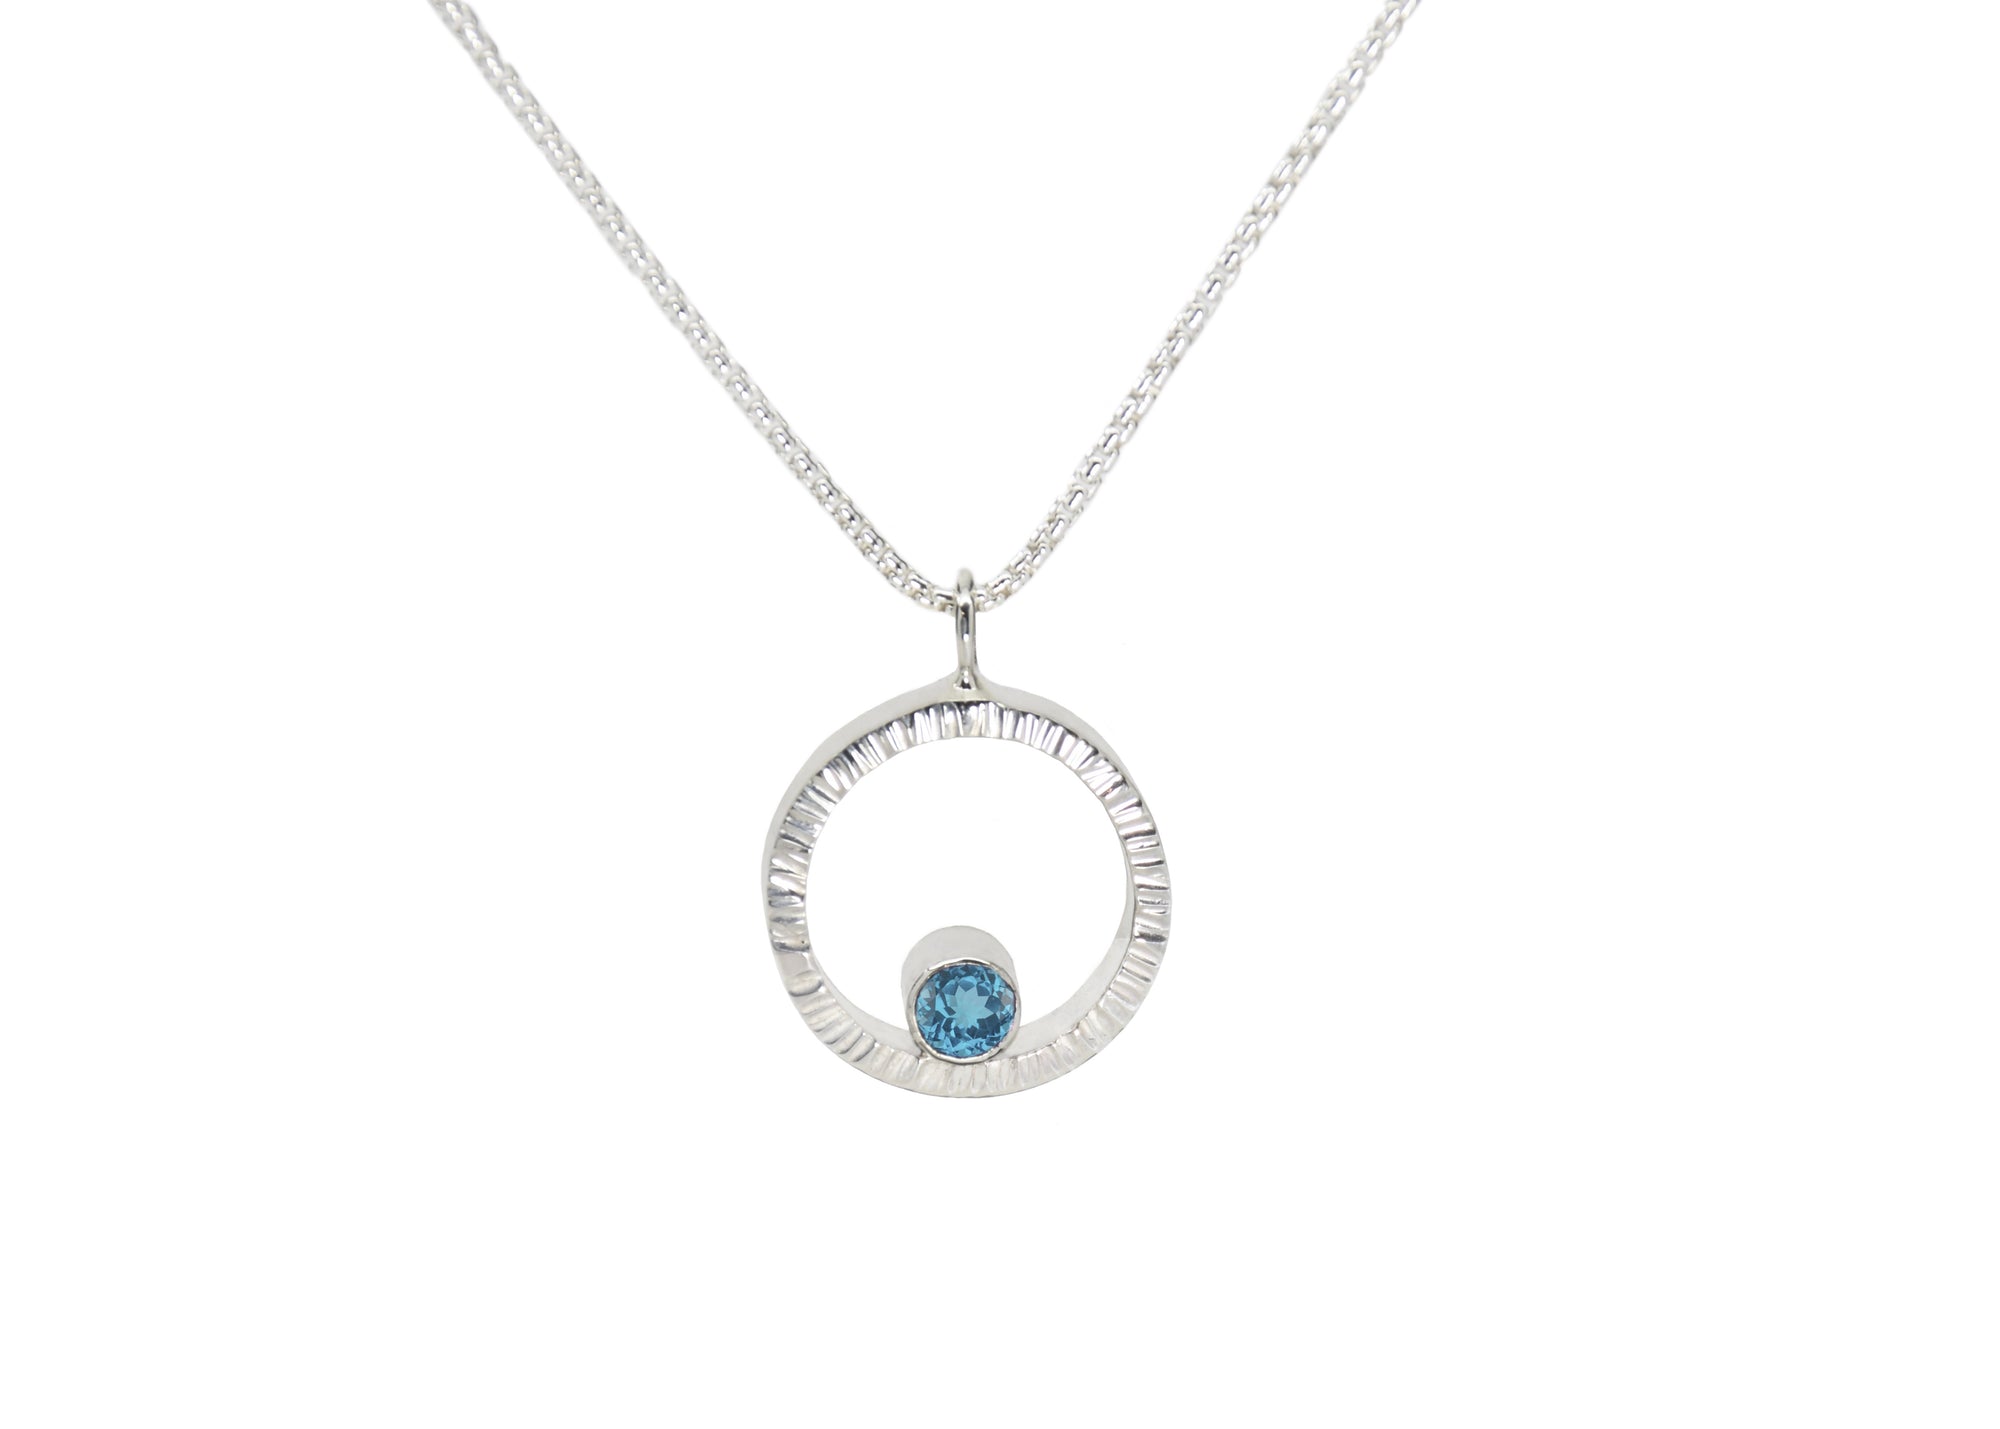 A sterling silver hammered circle pendant with Swiss blue topaz